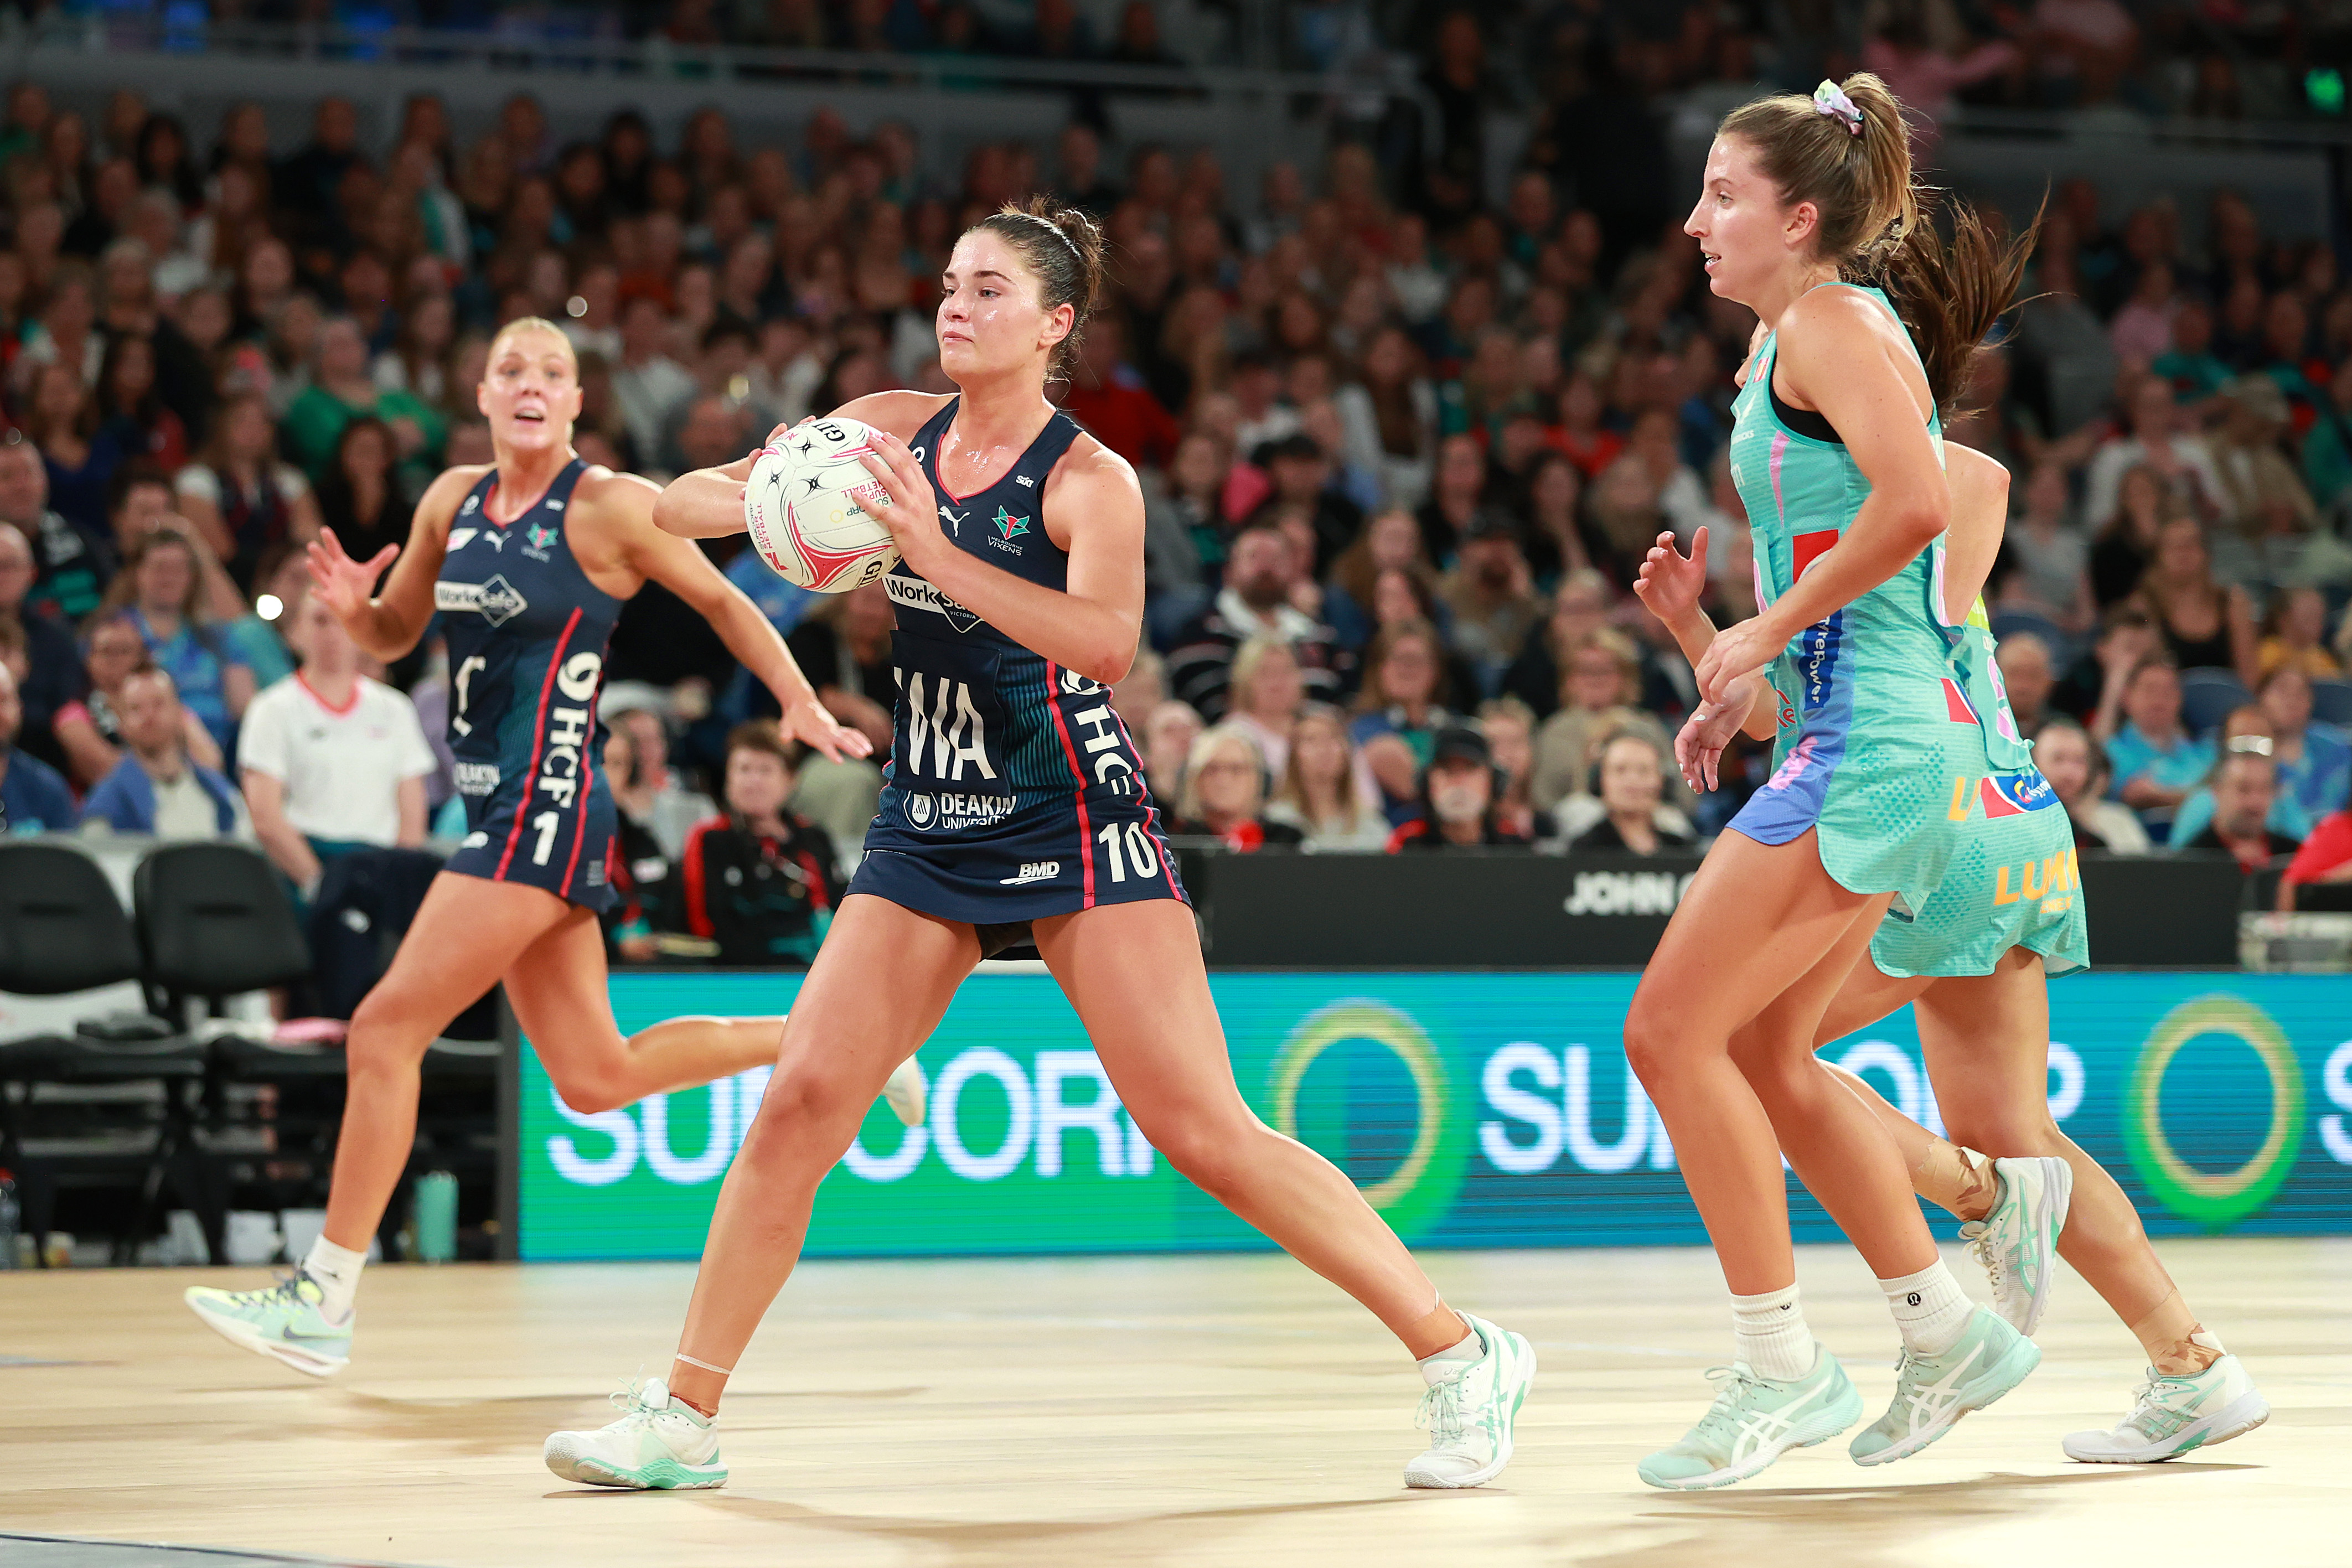 Zara Walters in her first Suncorp Super Netball game.